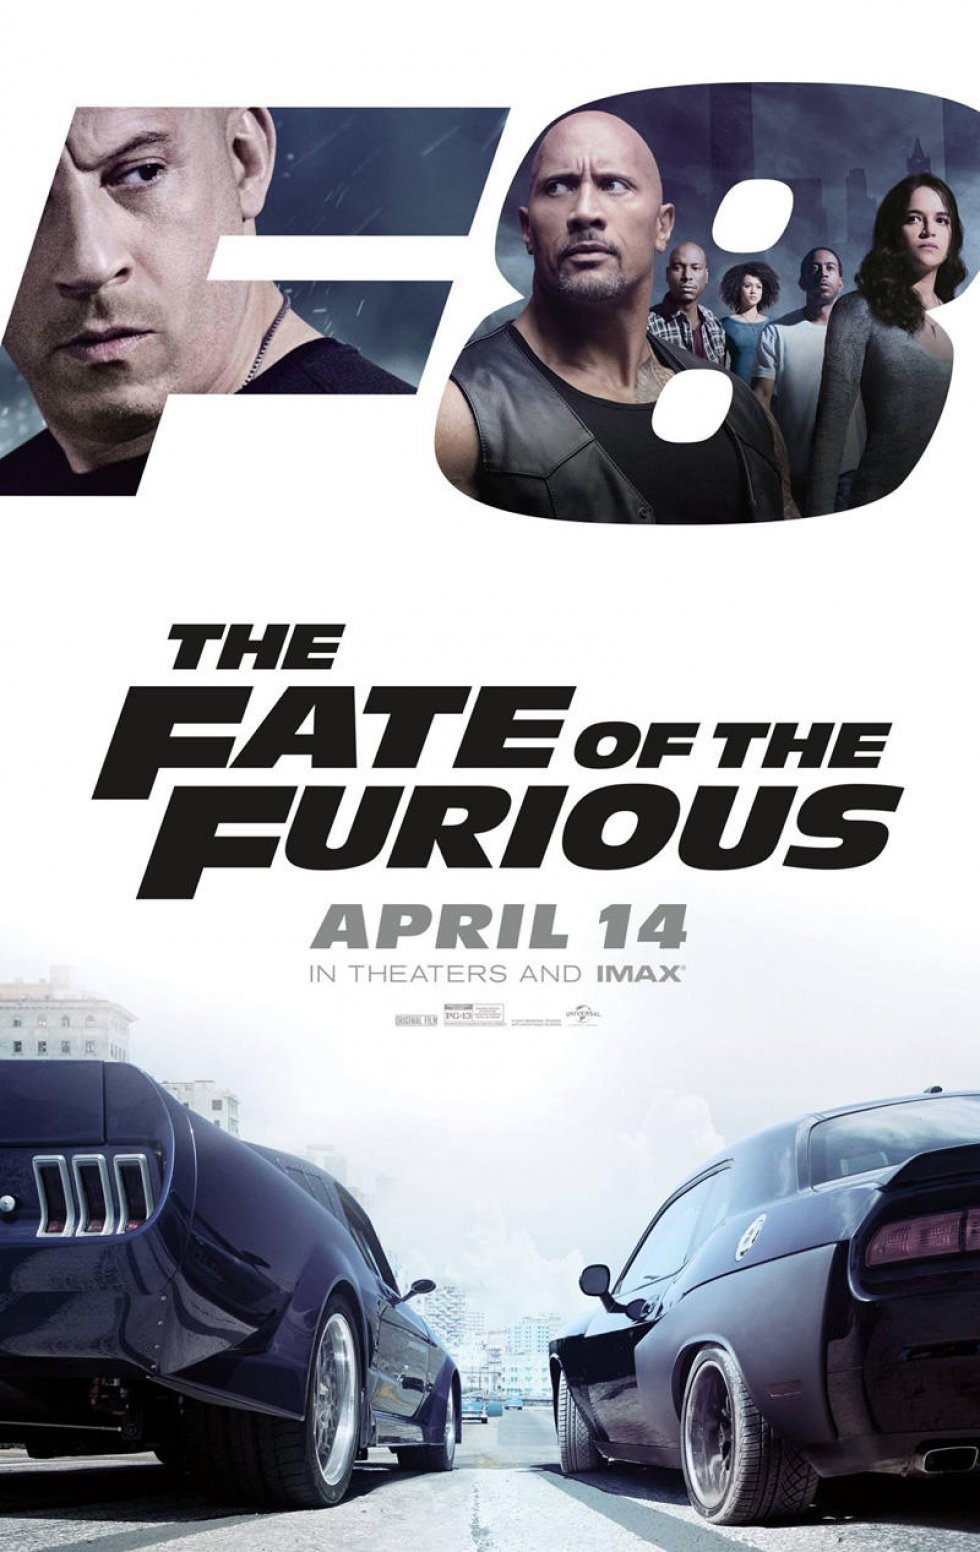 United International Pictures - Fast & Furious 8 (The Fate of the Furious) [Anmeldelse]